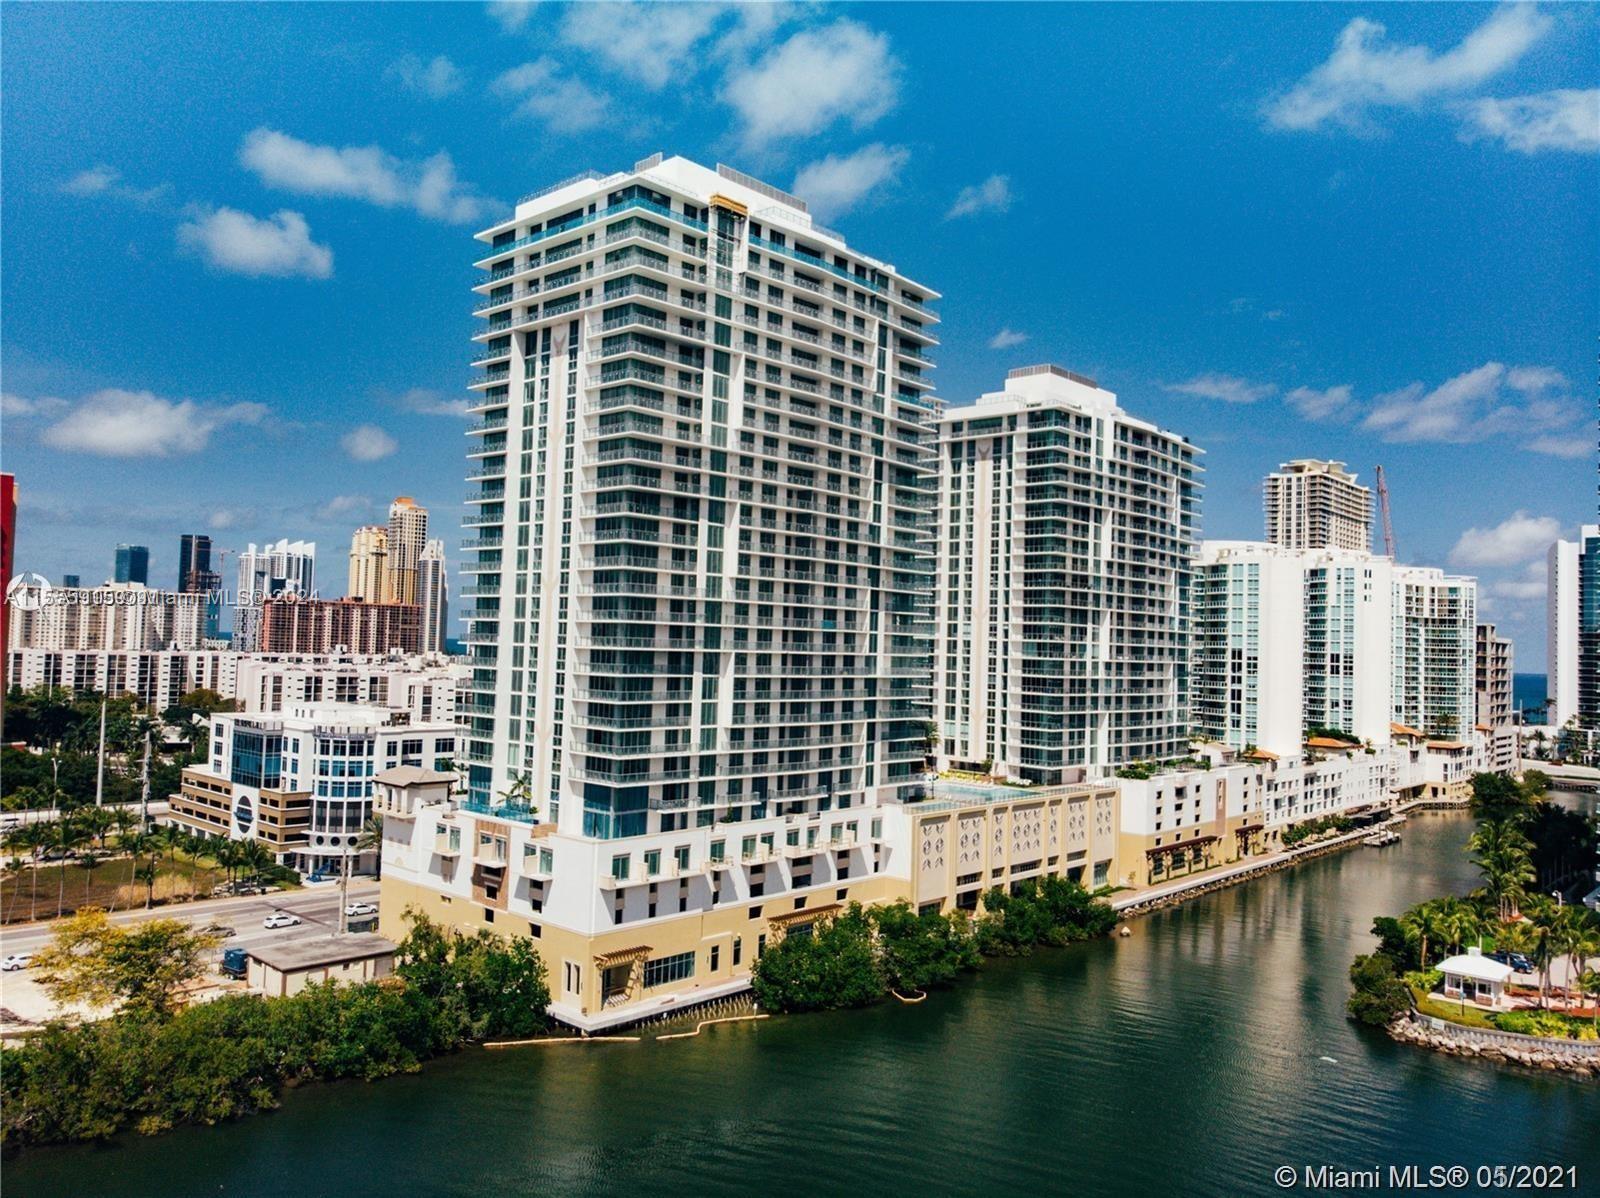 AVAILABLE APRIL 1ST, 2024. Live in the premier new development of Parque Towers in Sunny Isles Beach. This 2bdr/3bth + LARGE DEN unit features walk-in closets, contemporary designed cabinets, built-in Sub-Zero appliances, white quartz countertops, spacious bathrooms, and washer & dryer in the unit. Enjoy the breathtaking city views from a big terrace. Unit comes with 1 garage parking space. Conveniently located just minutes from the school, shopping plazas, beach, restaurant and a park across the street. Close to Oleta park, Aventura mall, Fort Lauderdale, both airports, and South beach. Parque Towers offers a variety of amenities that include 5 amazing pools, gym with a stunning view, SPA, Kids club, Private Beach Club, cinema, wine cellar, and lounge areas.